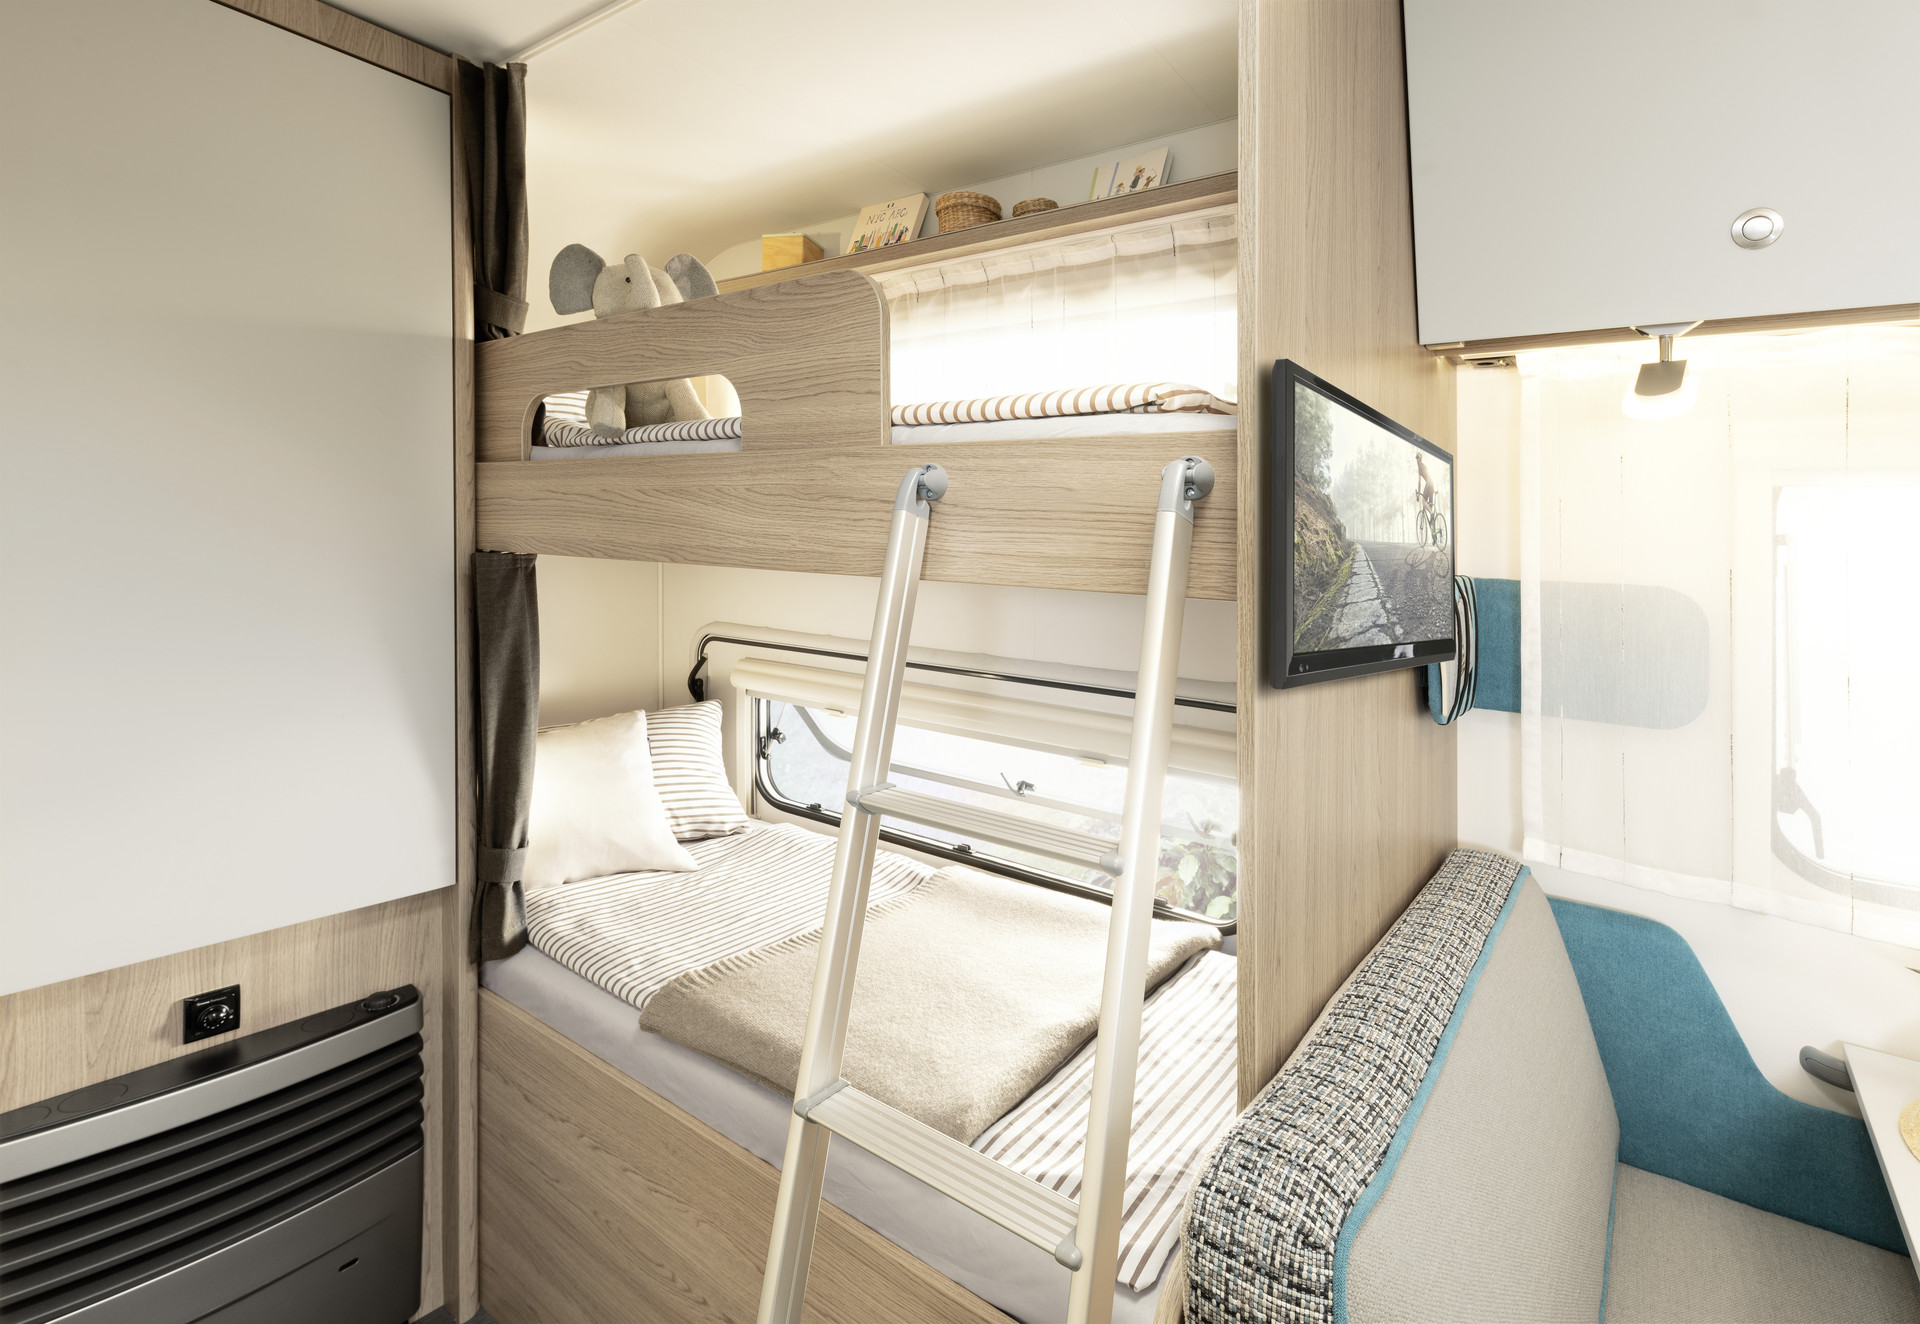 Sweet dreams! Ideal for smaller campers – cosy bunk beds with a view • 490 QSK | Fyn